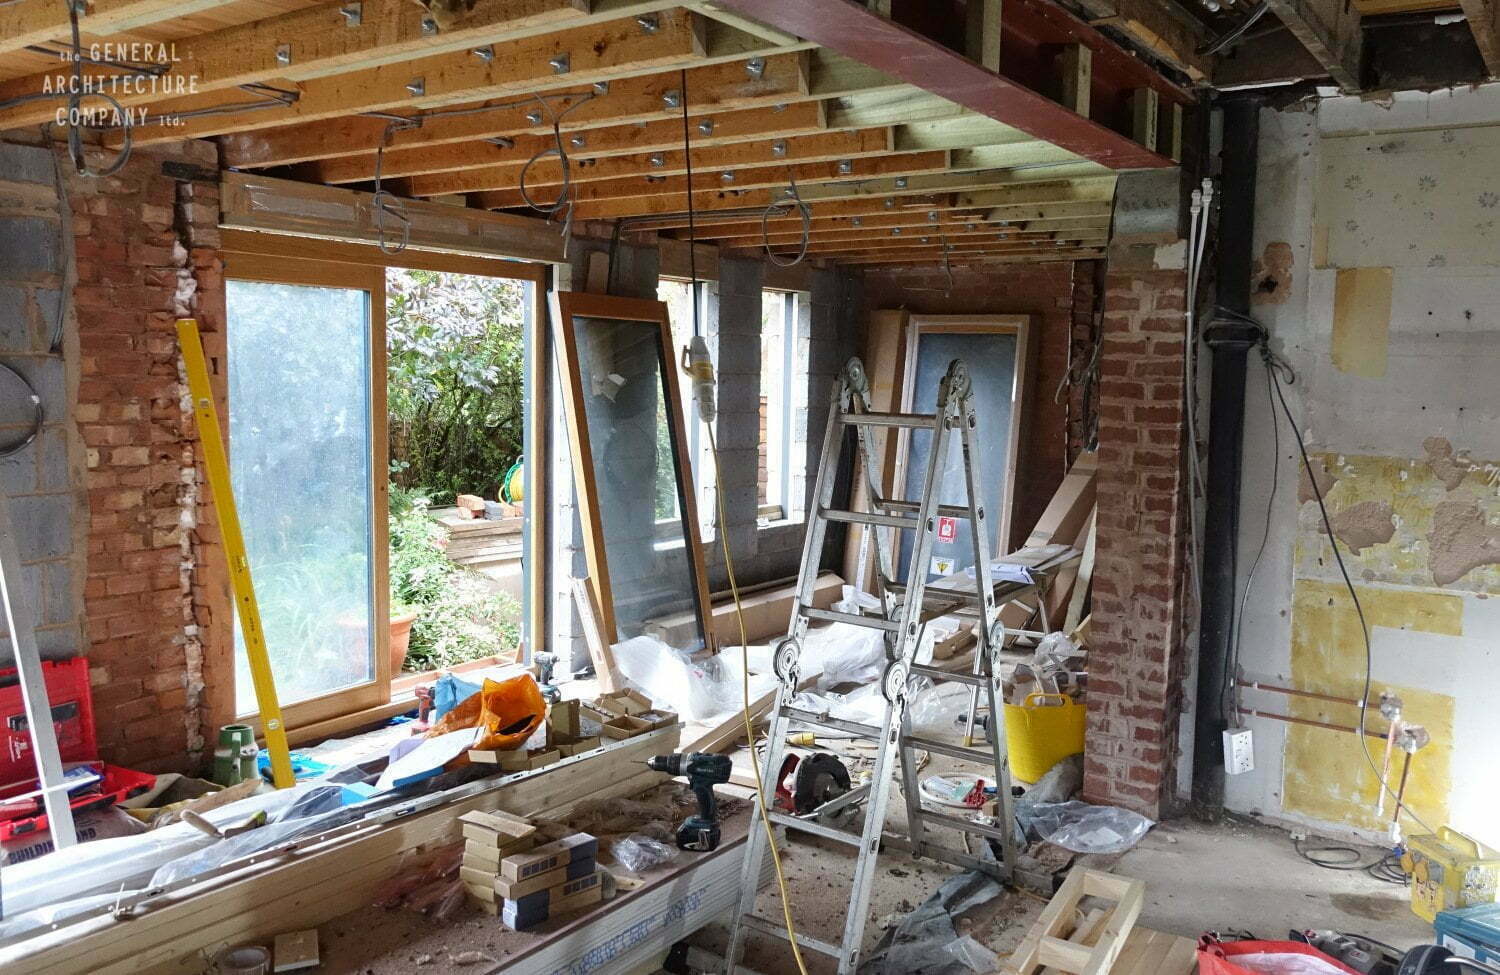 A Look Inside An Ongoing Project In Bournville…